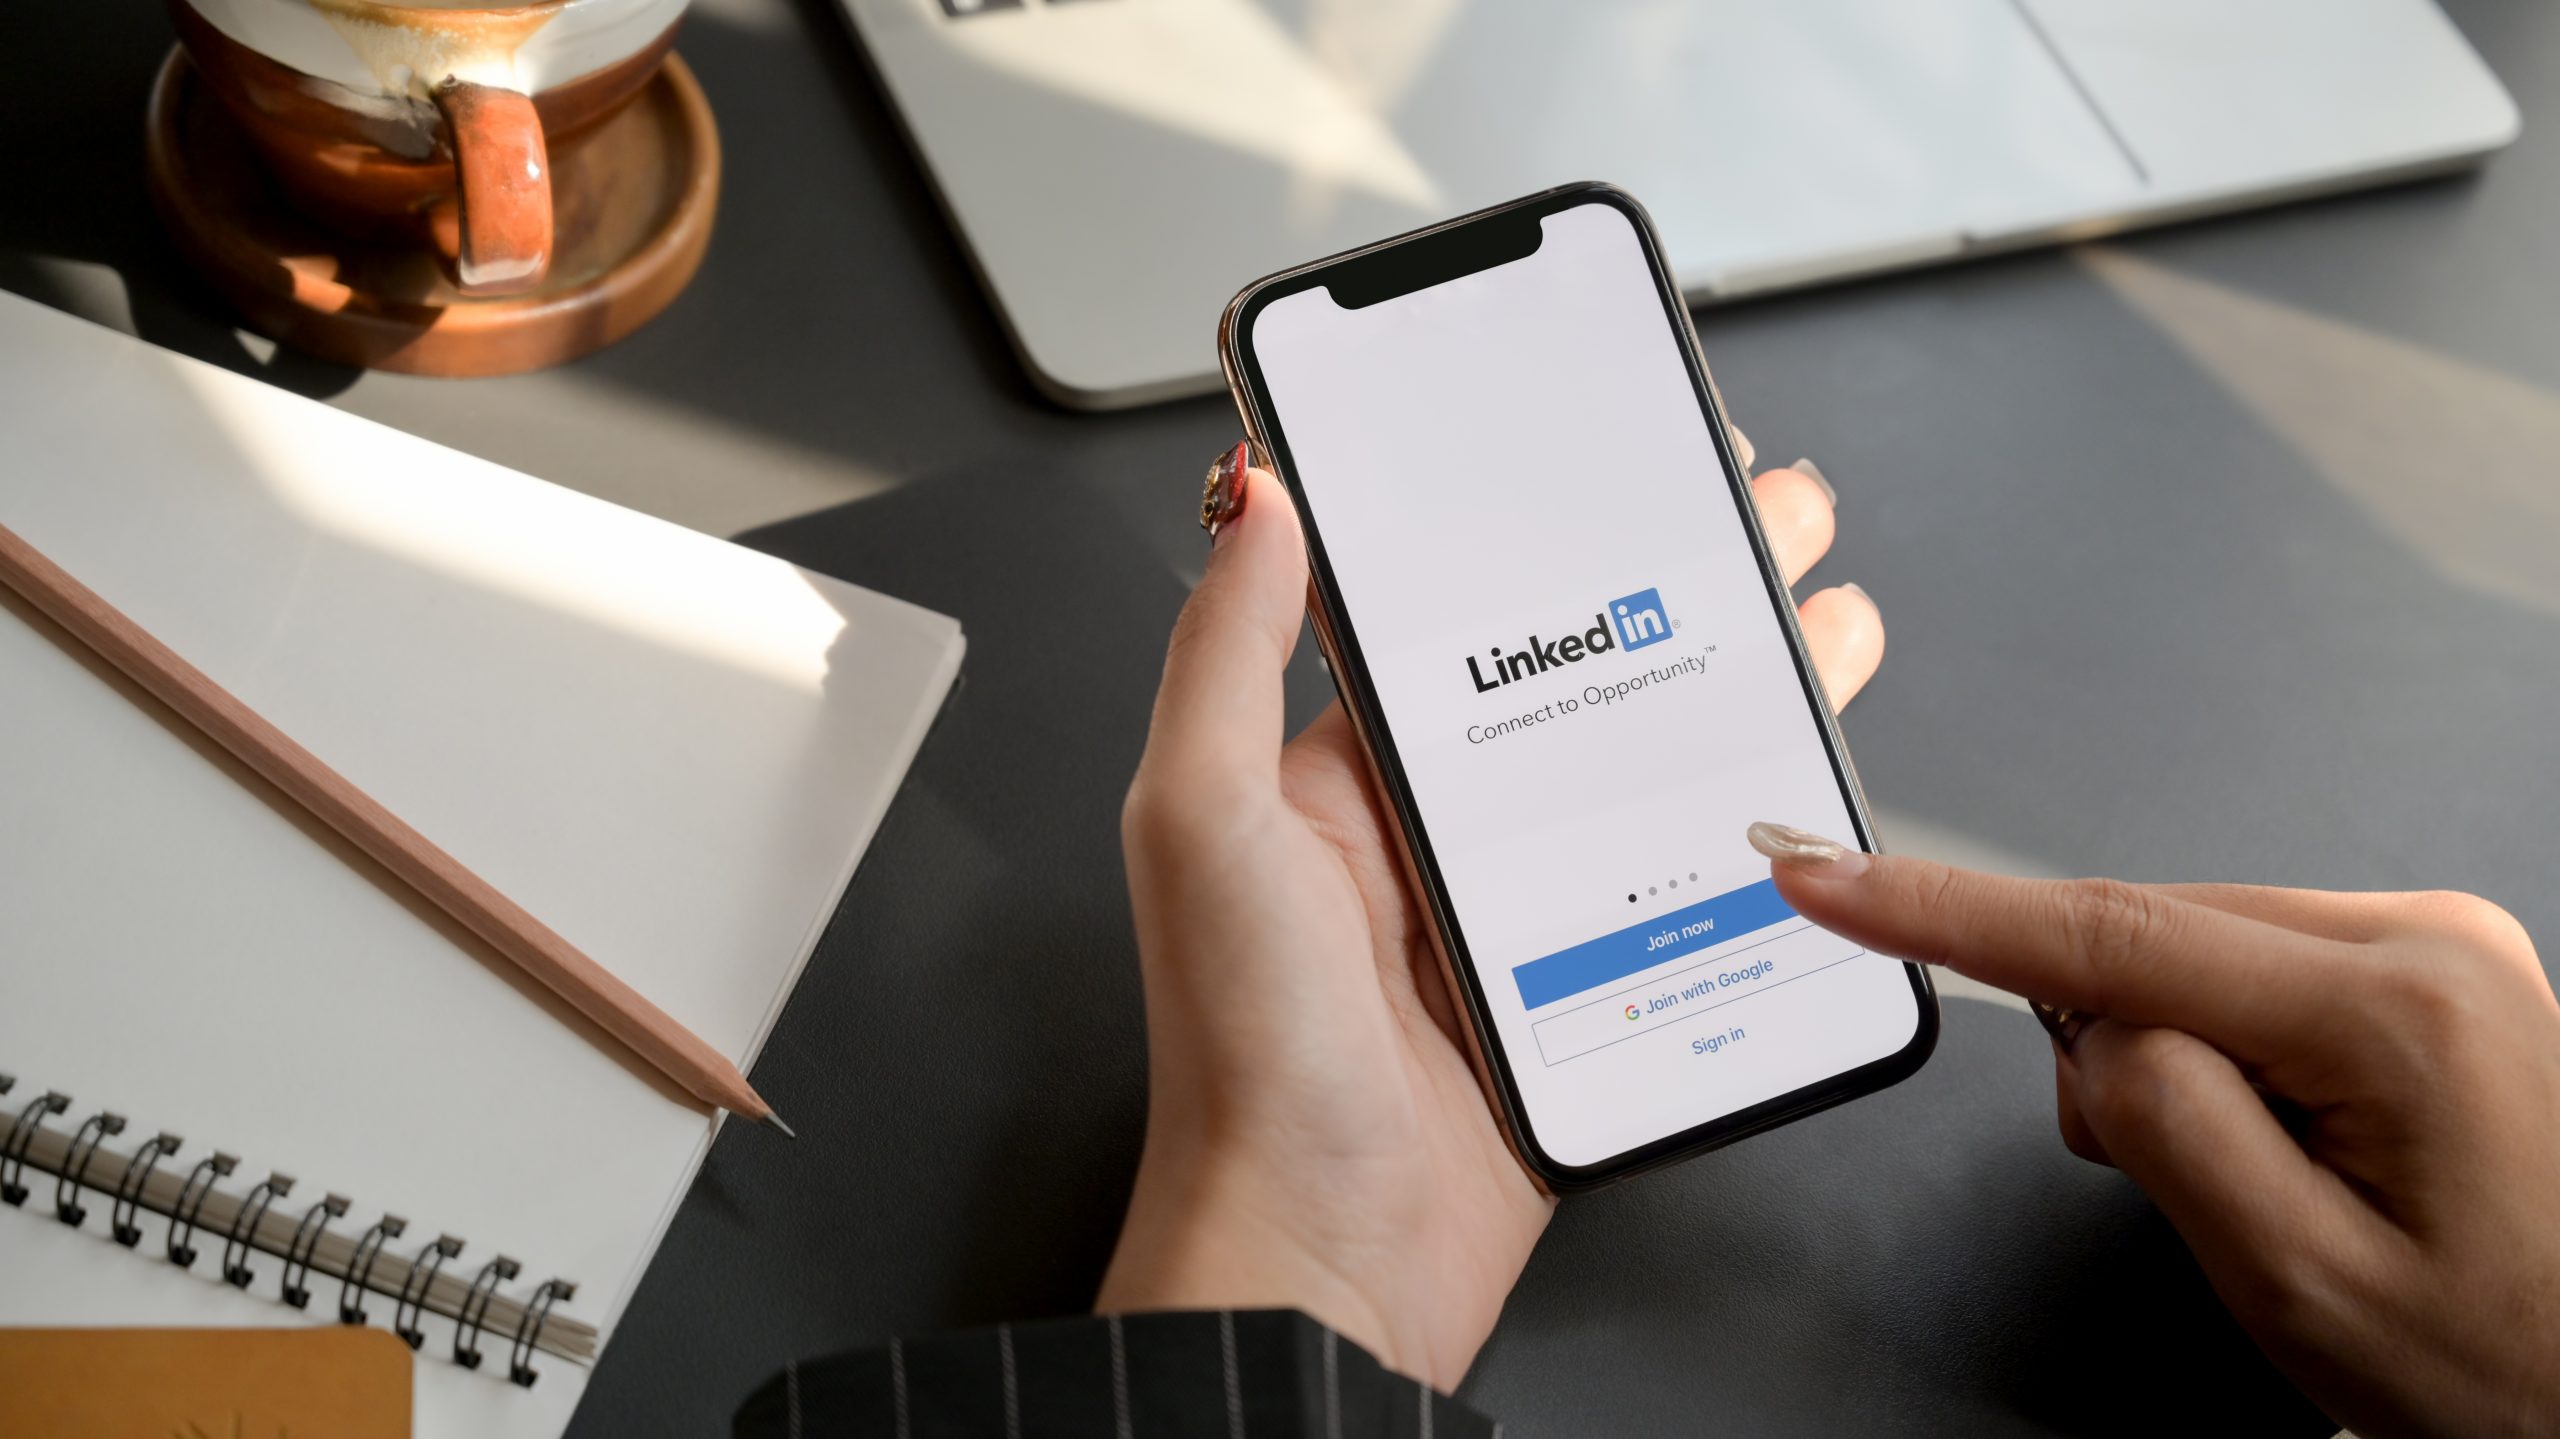 LinkedIn unveiled a slew of new AI features across its job-hunting, marketing, and sales tools to stay ahead of the issues facing businesses.